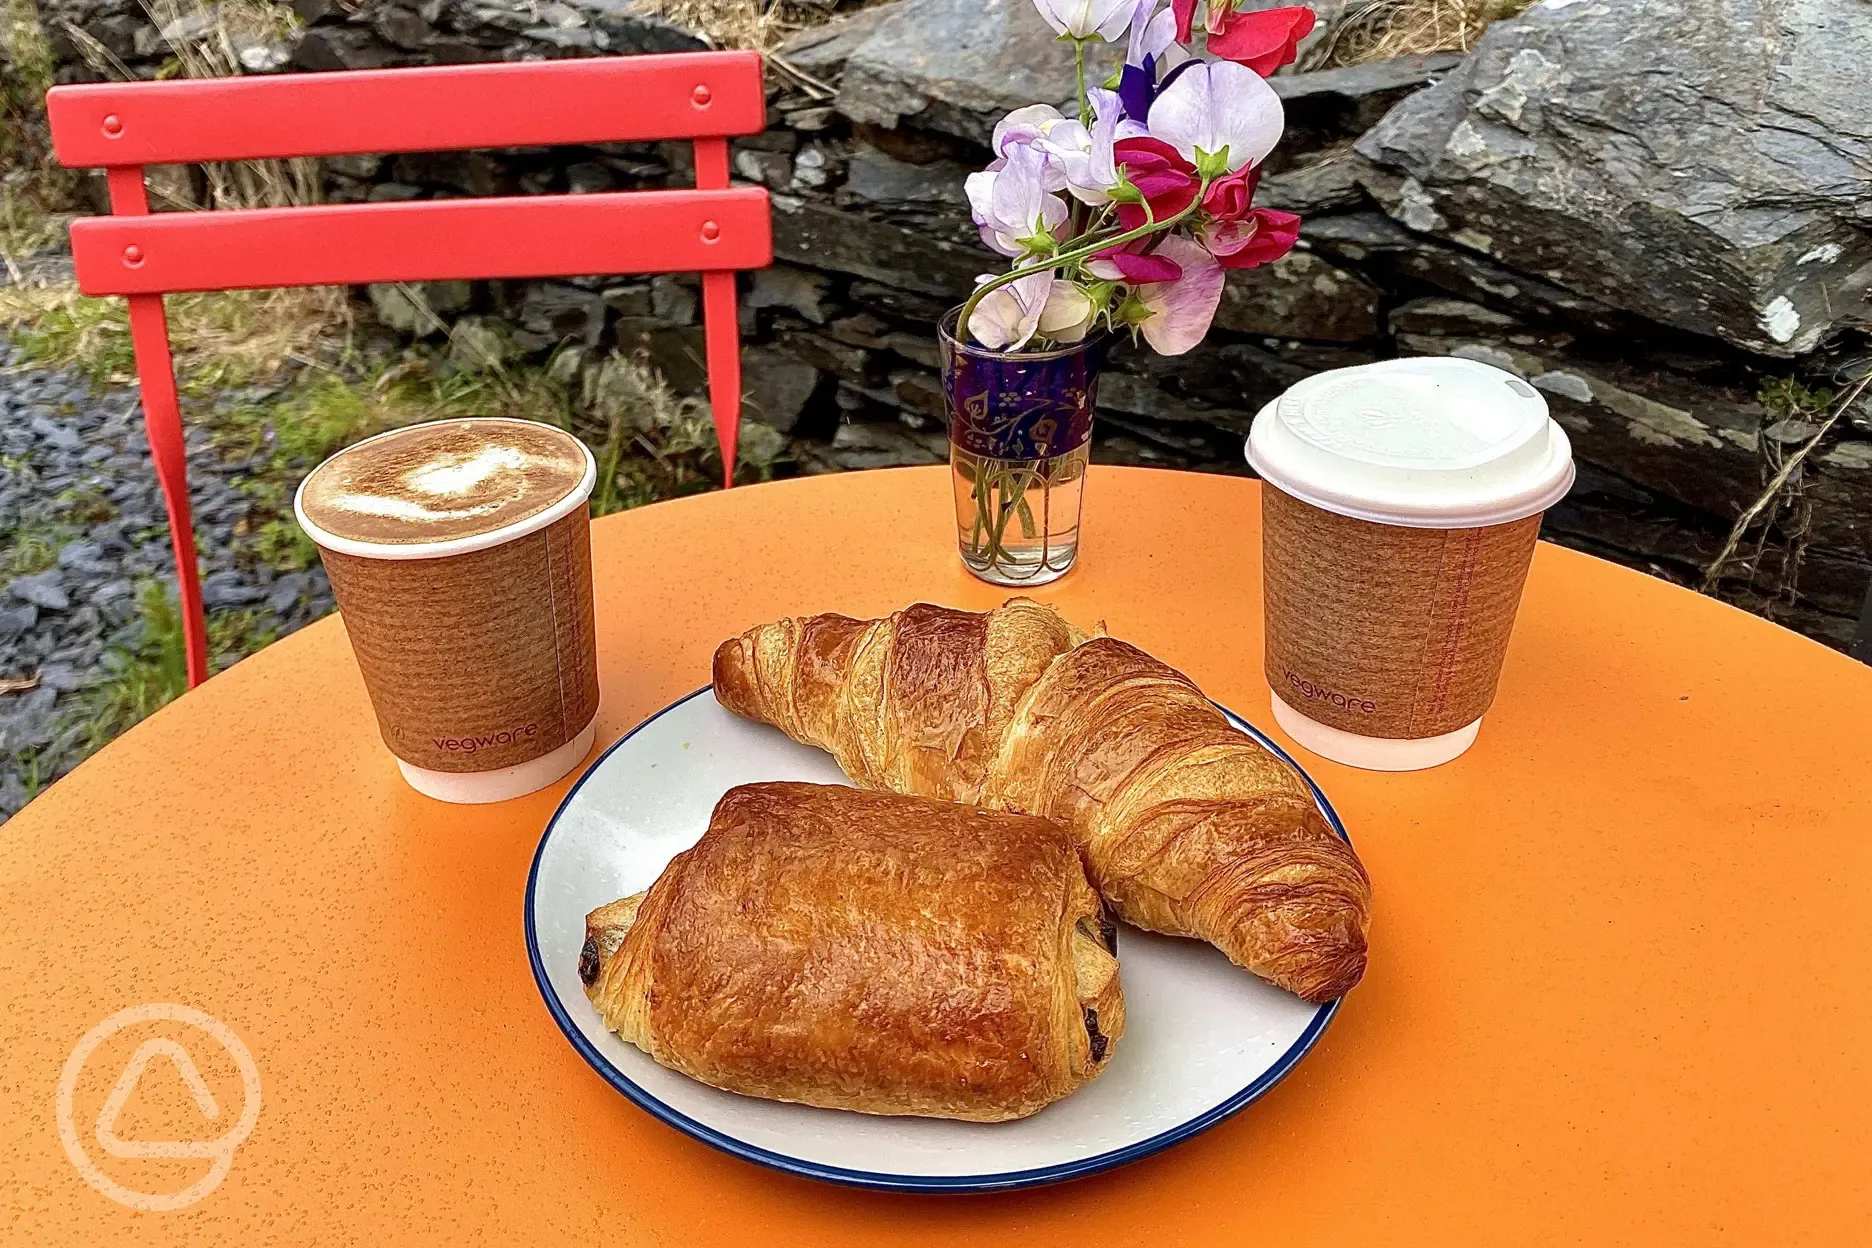 Croissants and fresh coffee available to purchase on site